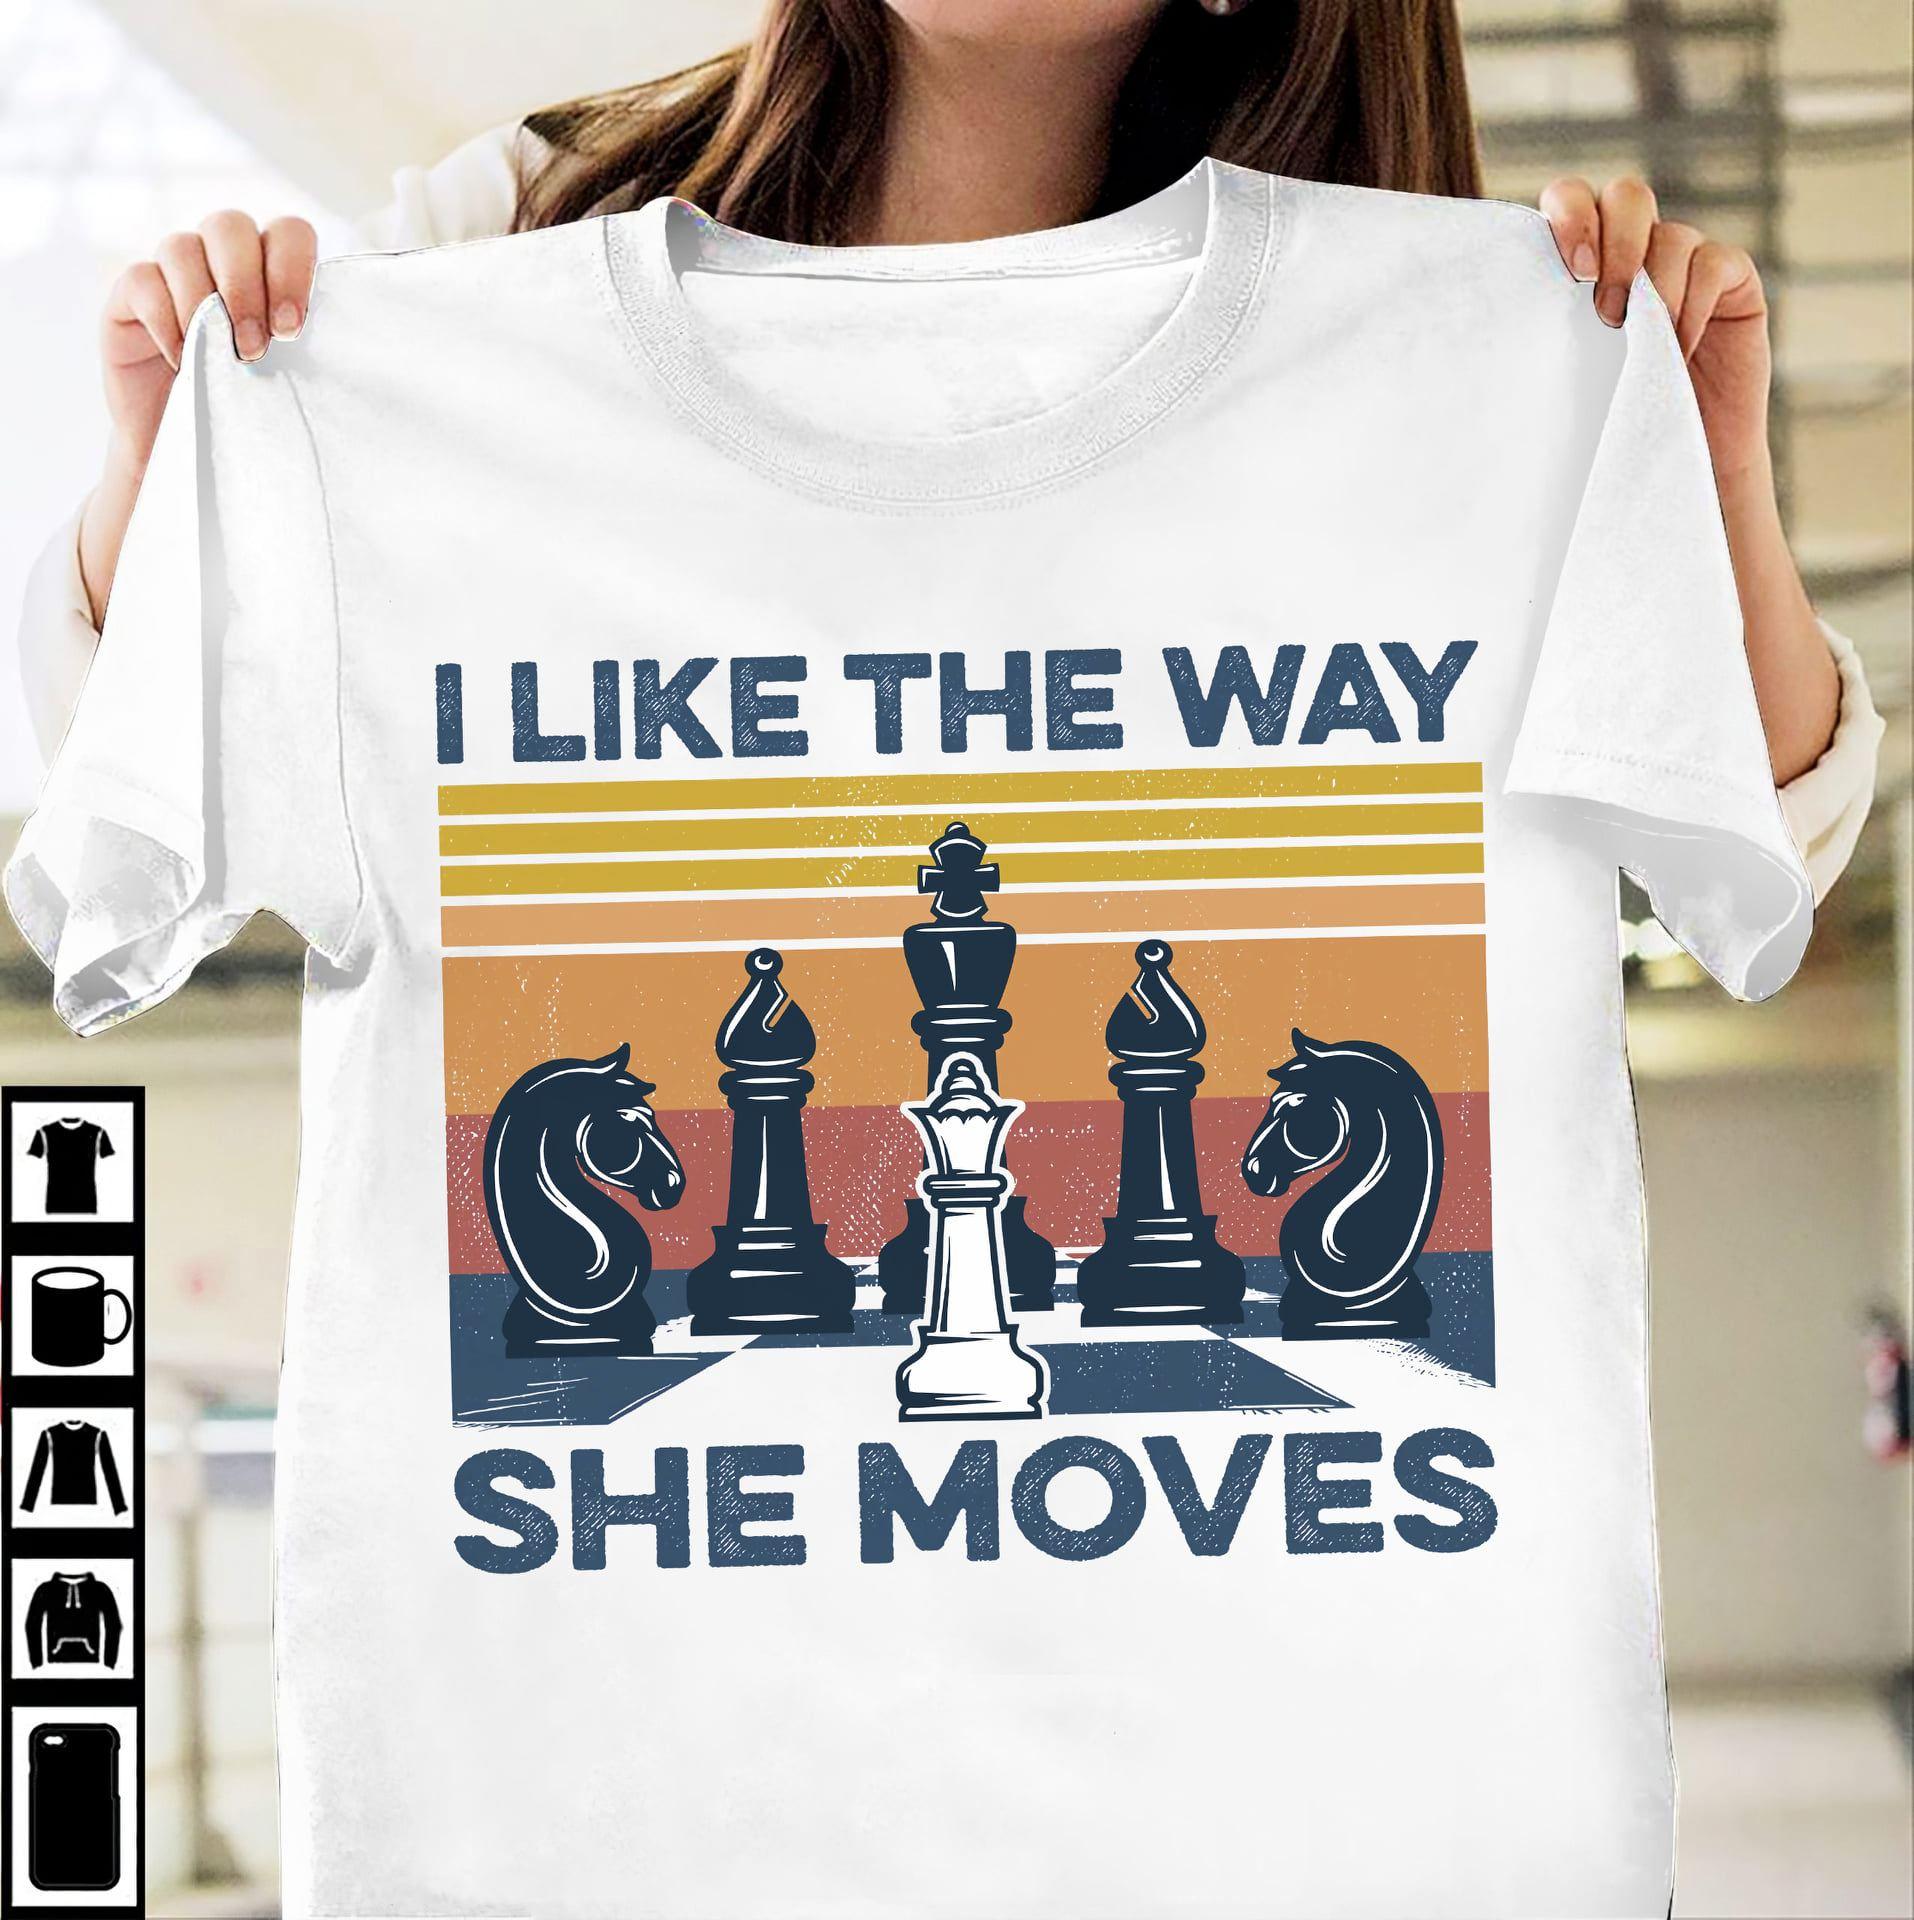 I like the way she moves - The queen moves, love playing chess